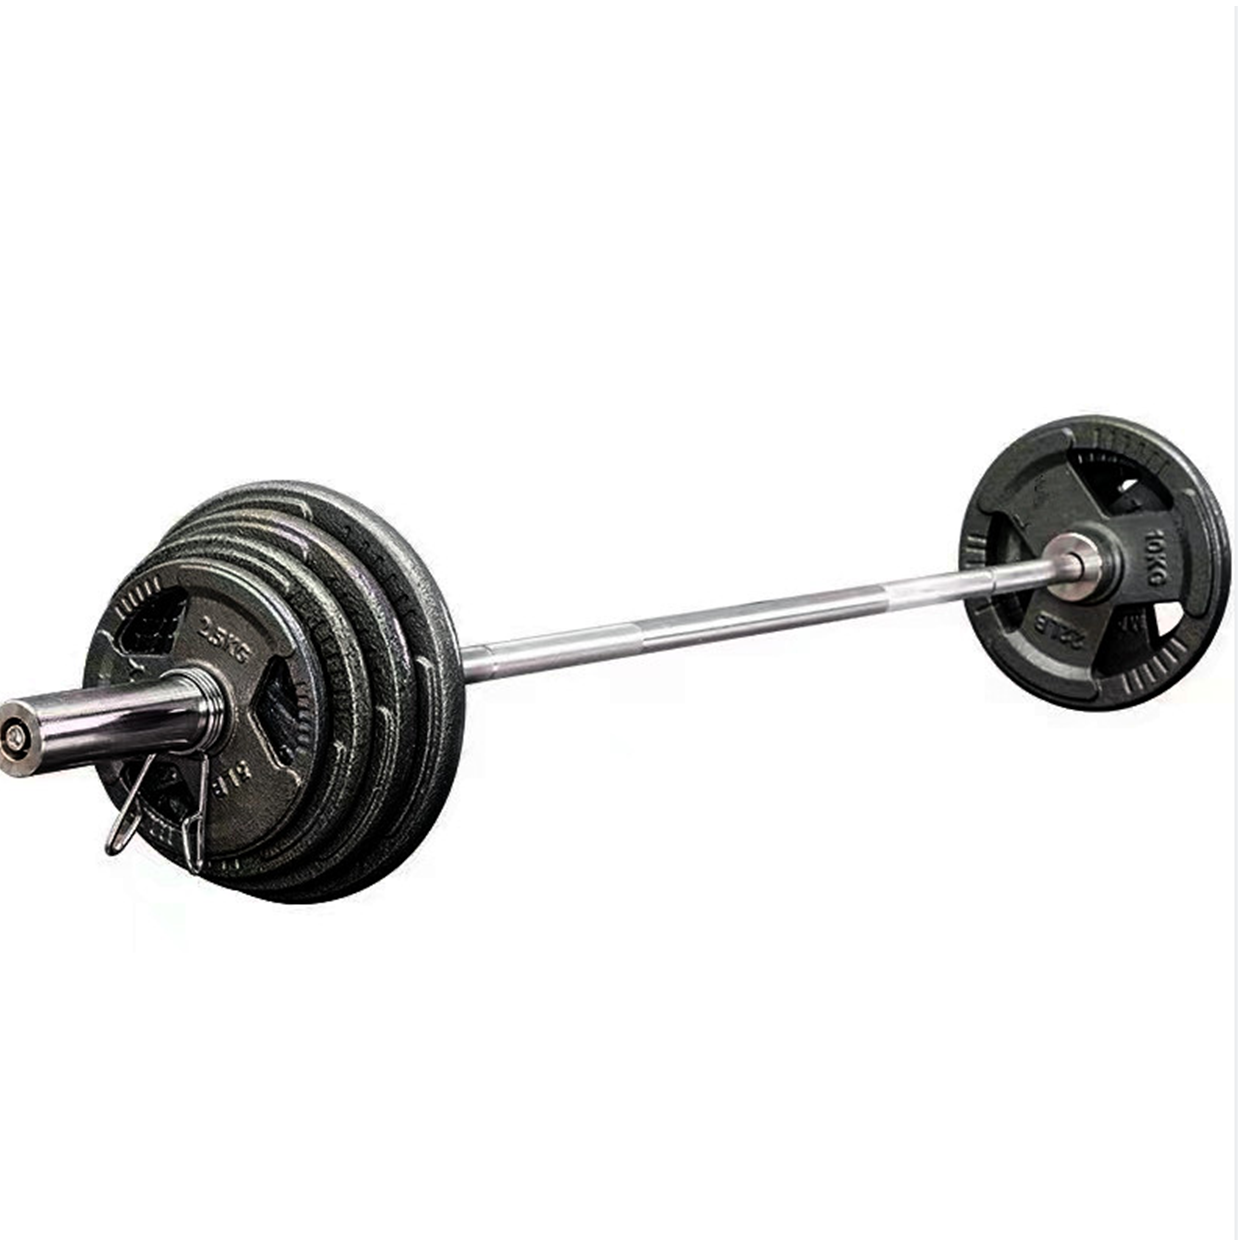 110KG Weights Set and 20KG Barbell